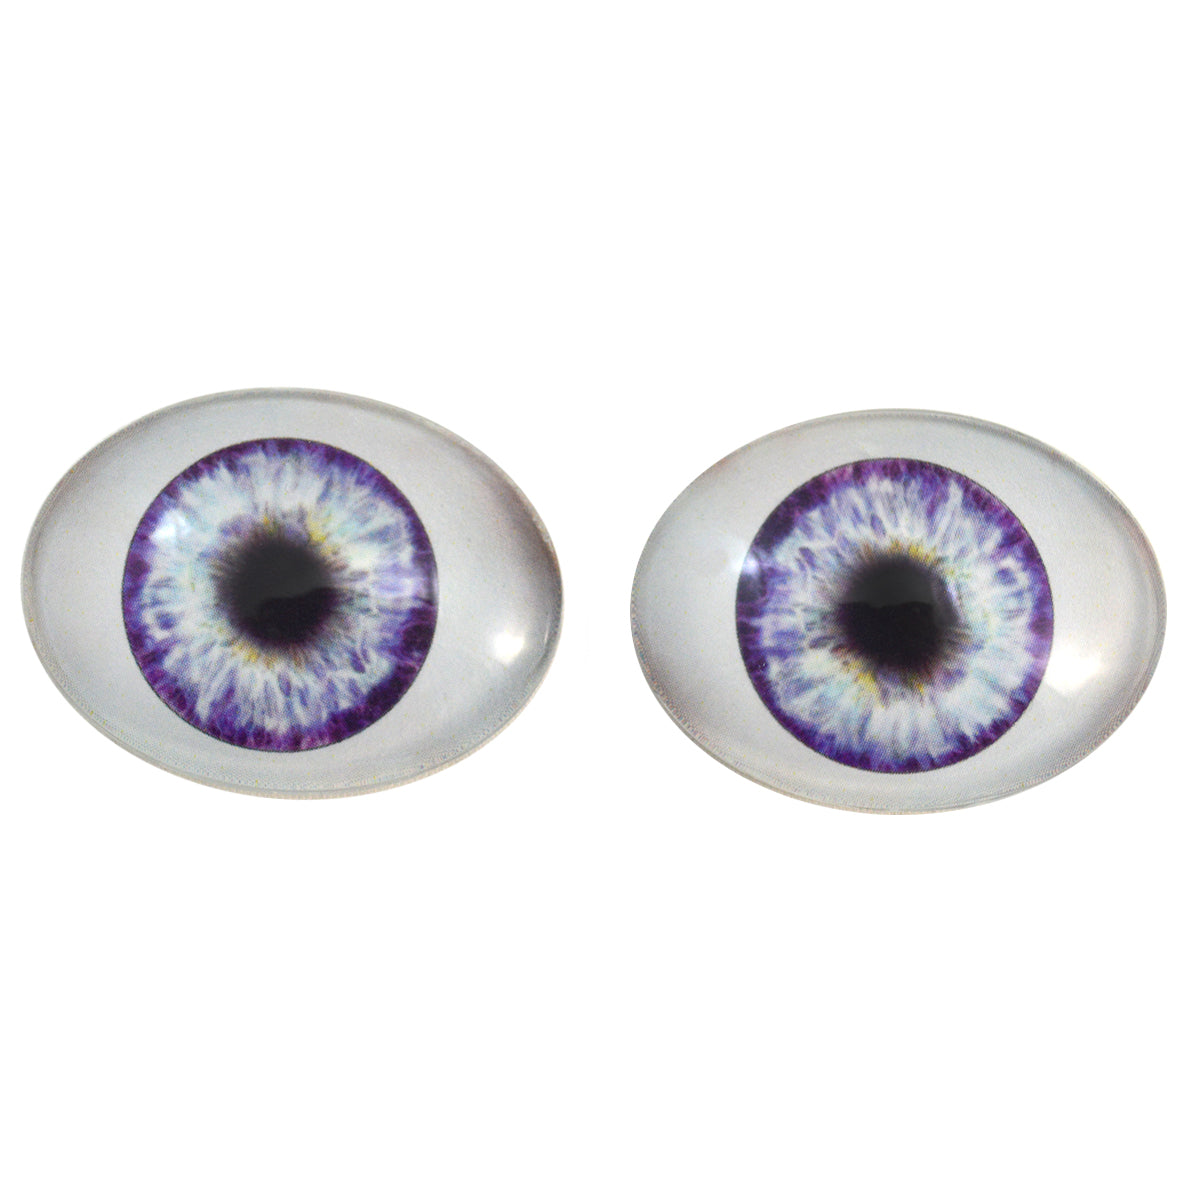 Glass Oval Paperweight Doll Eyes with a Human Iris - 1 pair (5035 Seri